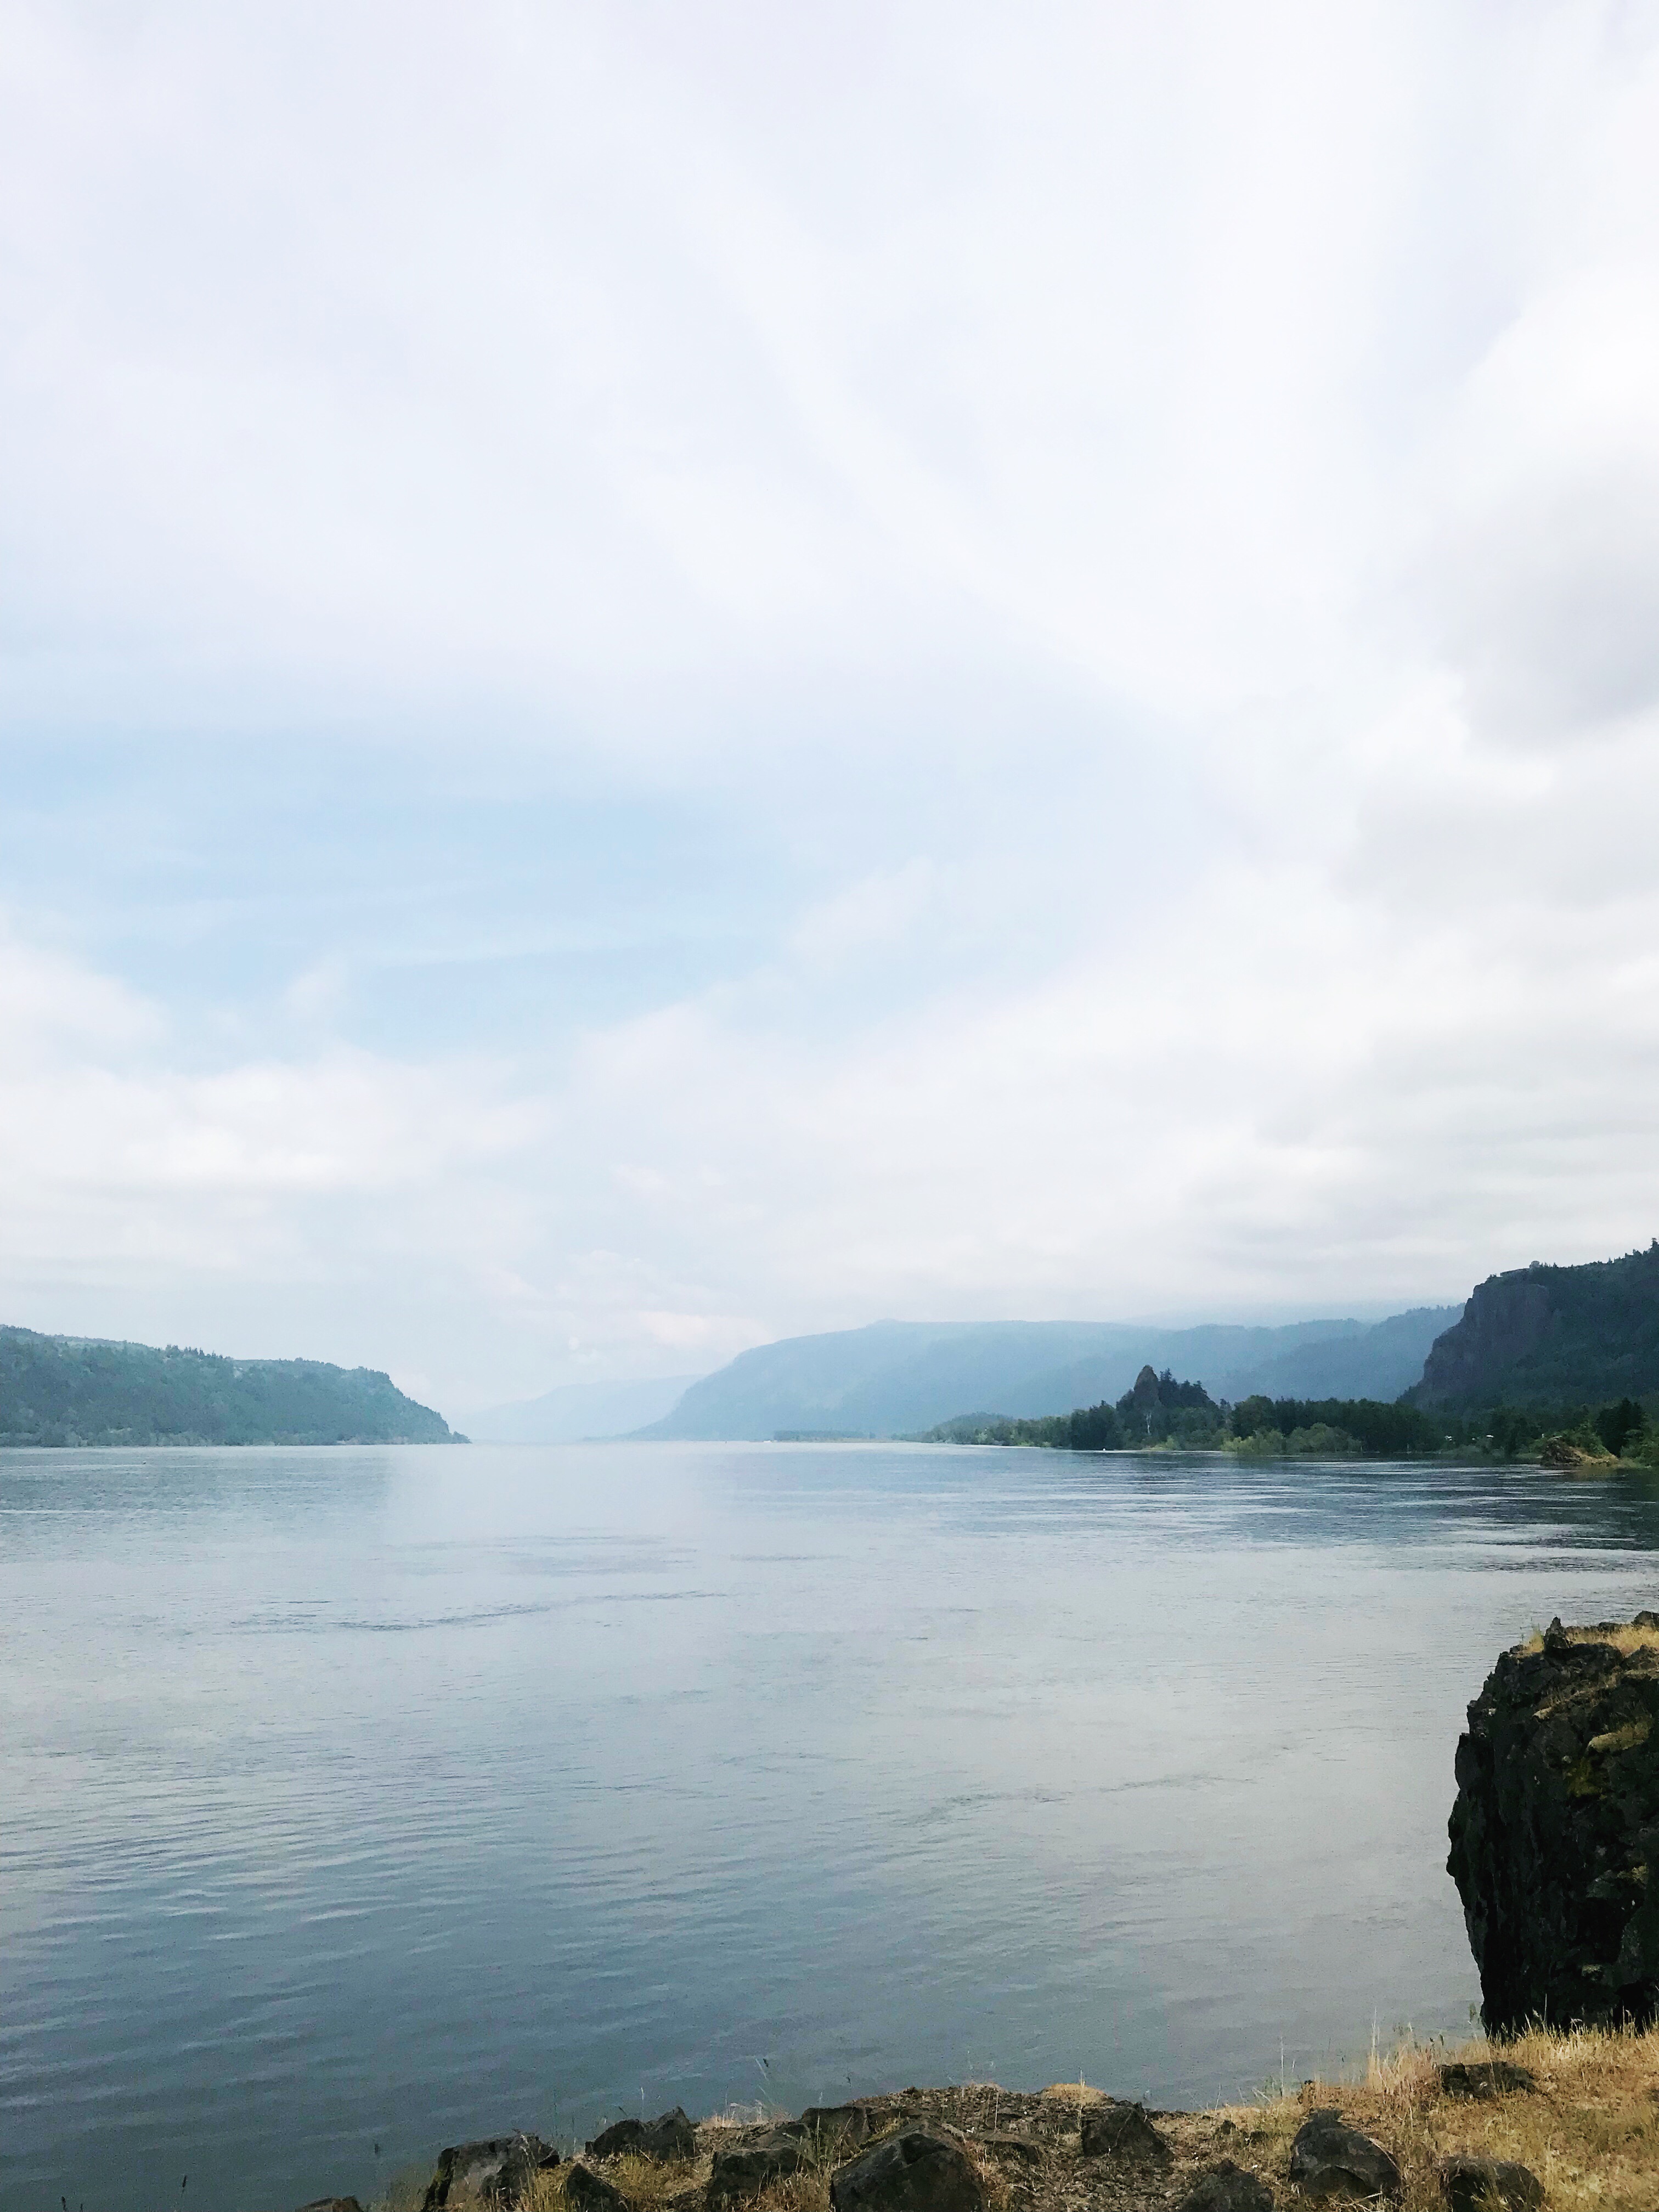 A landscape photograph at Columbia River Gorge in Portland OR